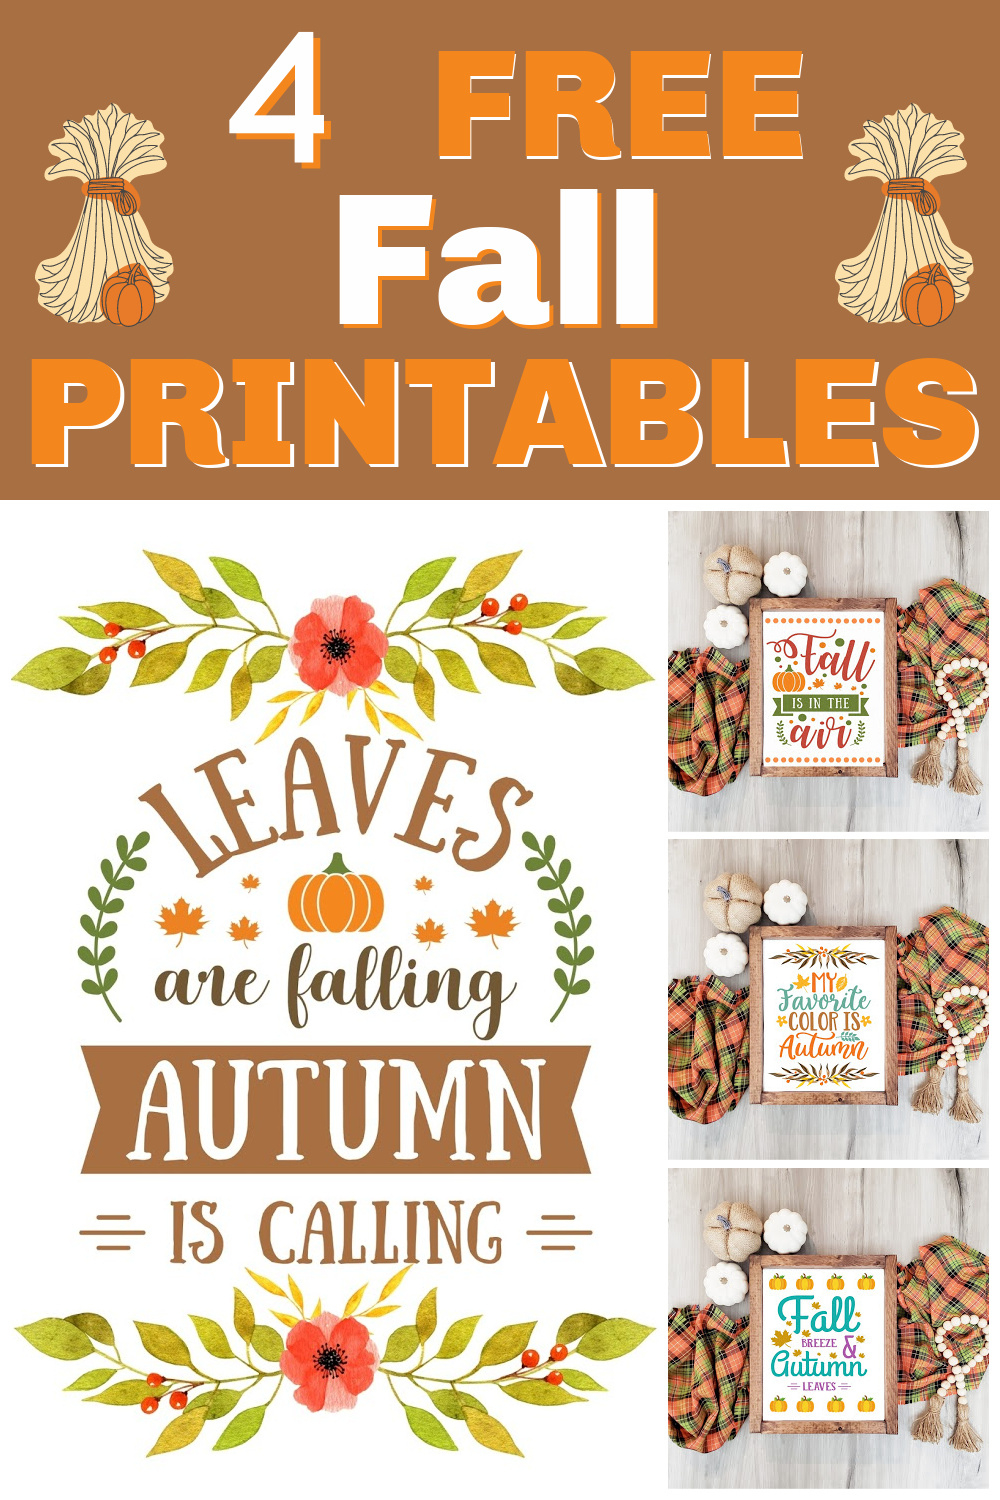 Free Fall Printables For The Home - Sweet Pea with regard to Free Autumn Printables